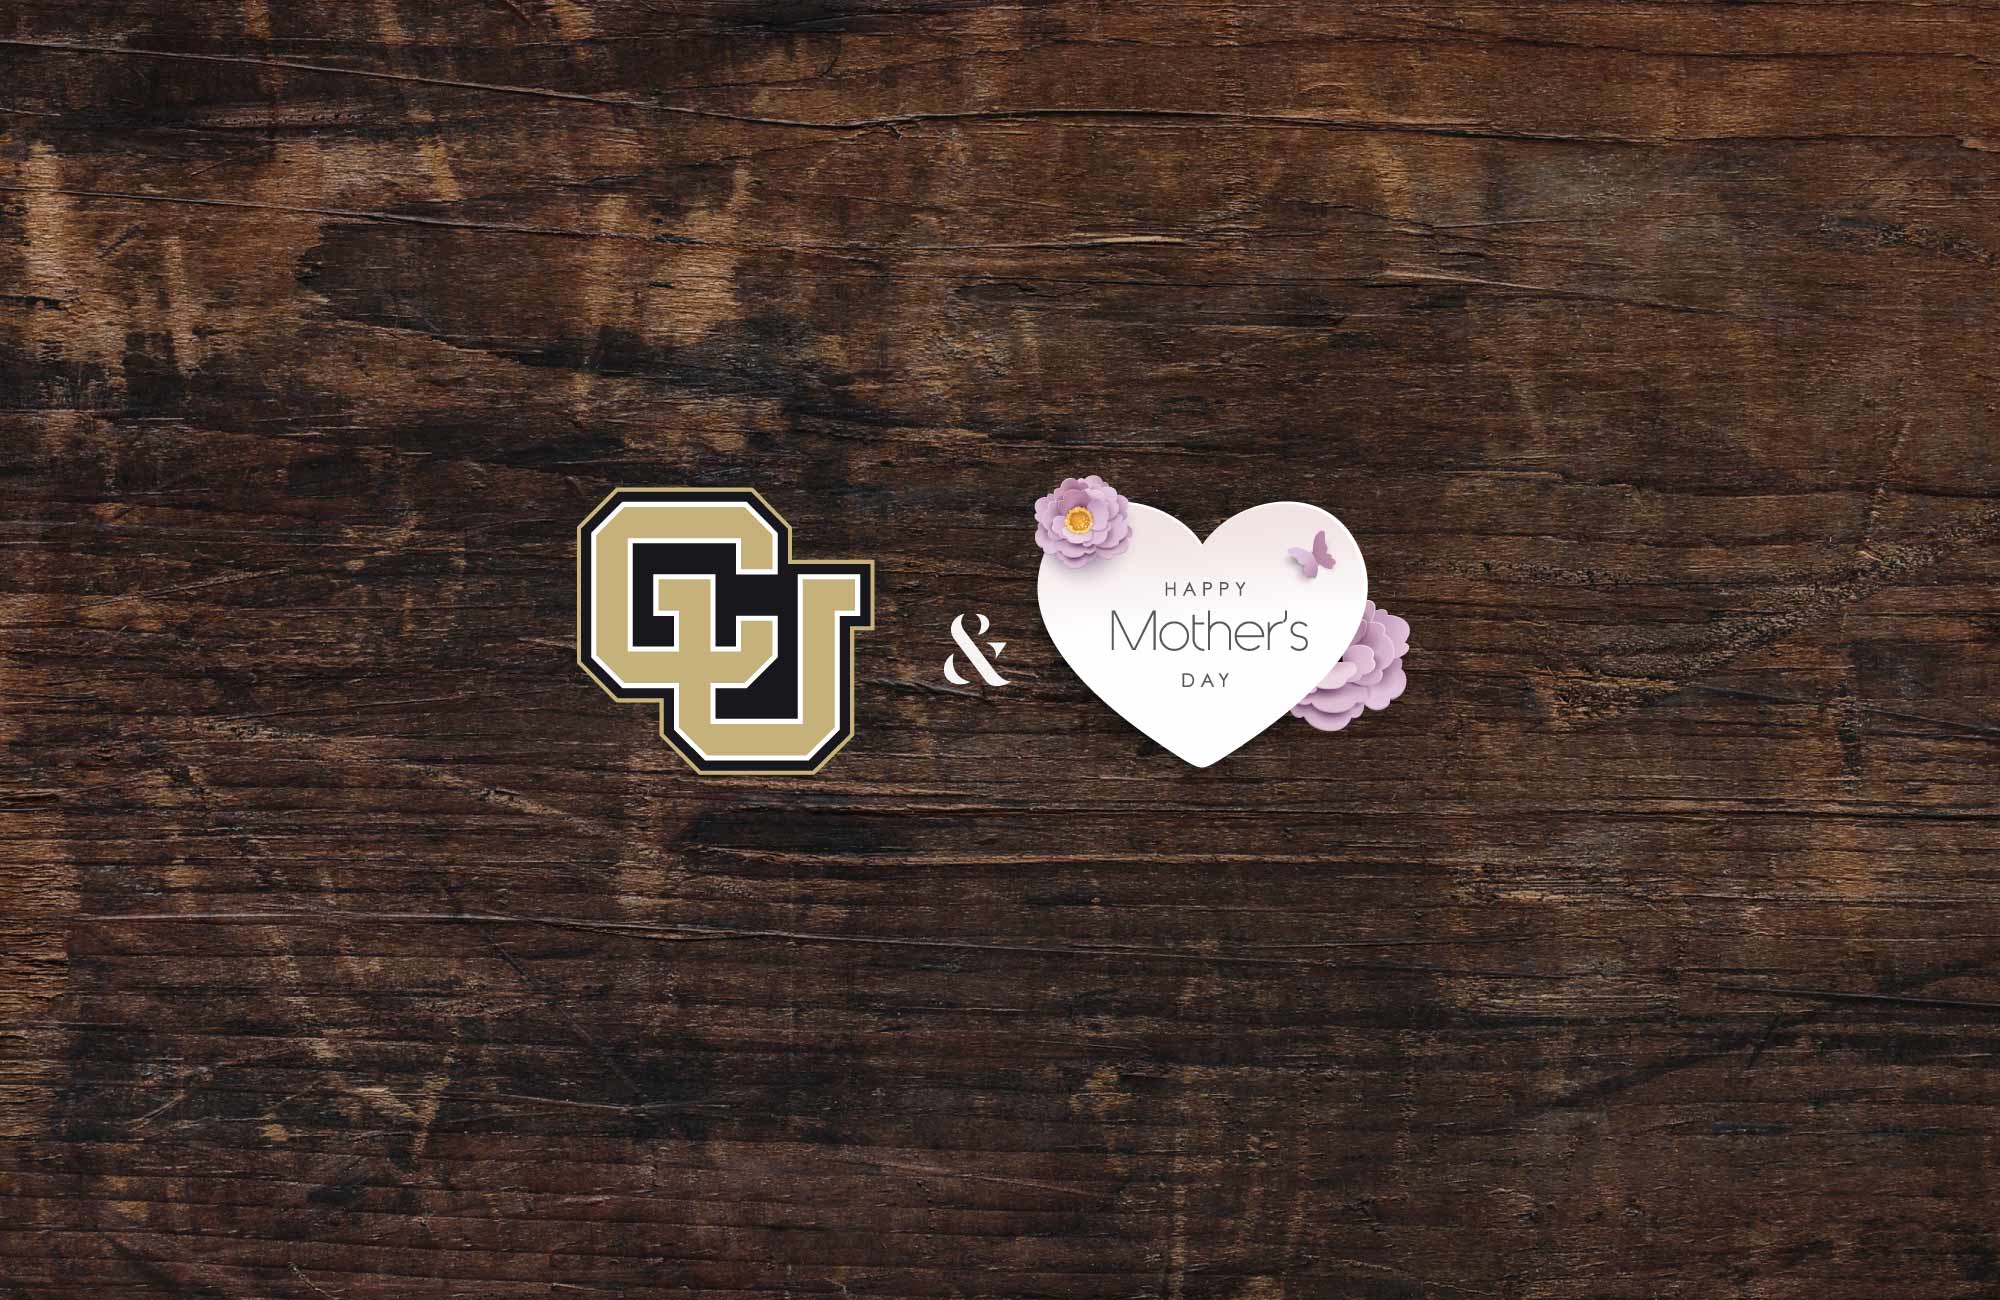 CU Boulder Graduation and Mother’s Day